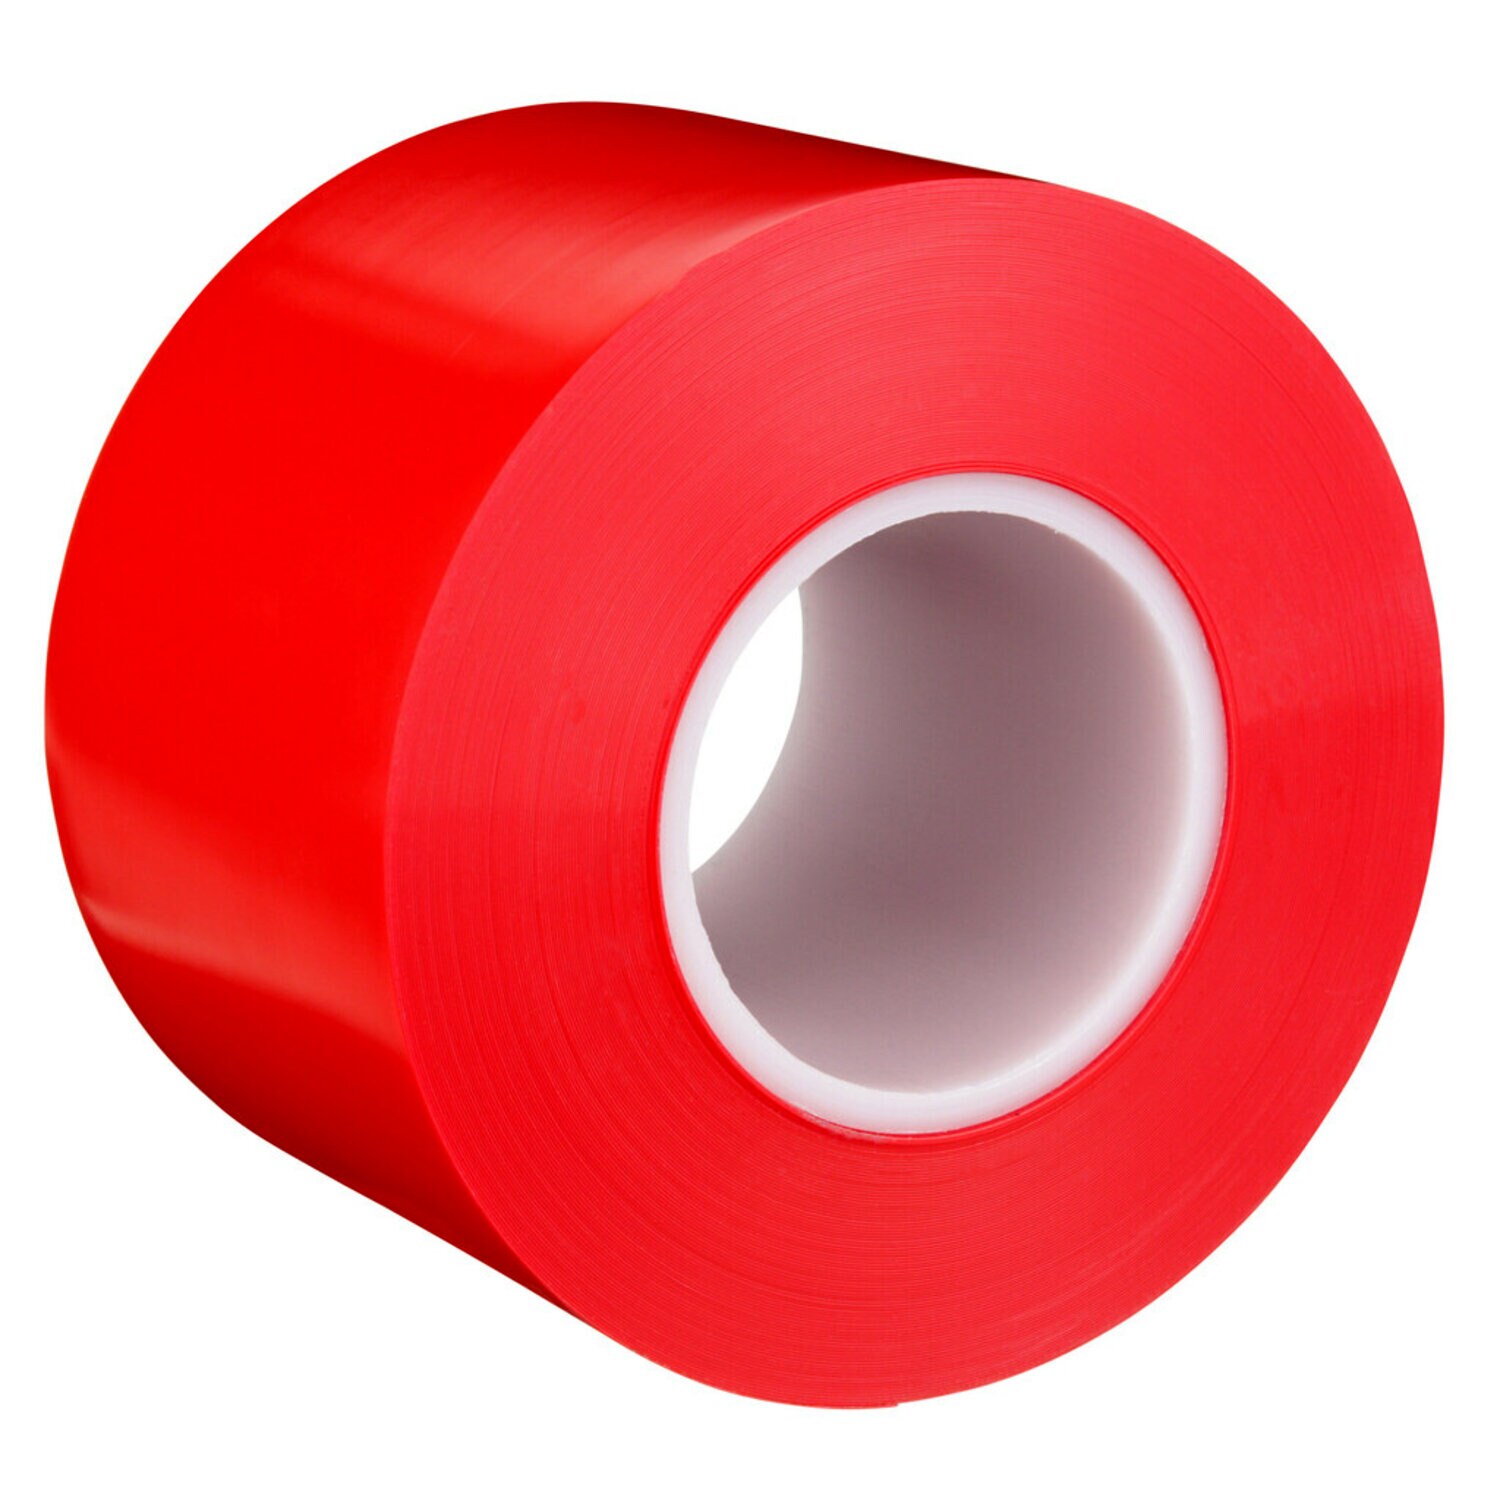 7100259700 - 3M Durable Floor Marking Tape 971, Red, 4 in x 36 yd, 17 mil, 3 Rolls/Case, Individually Wrapped Conveniently Packaged